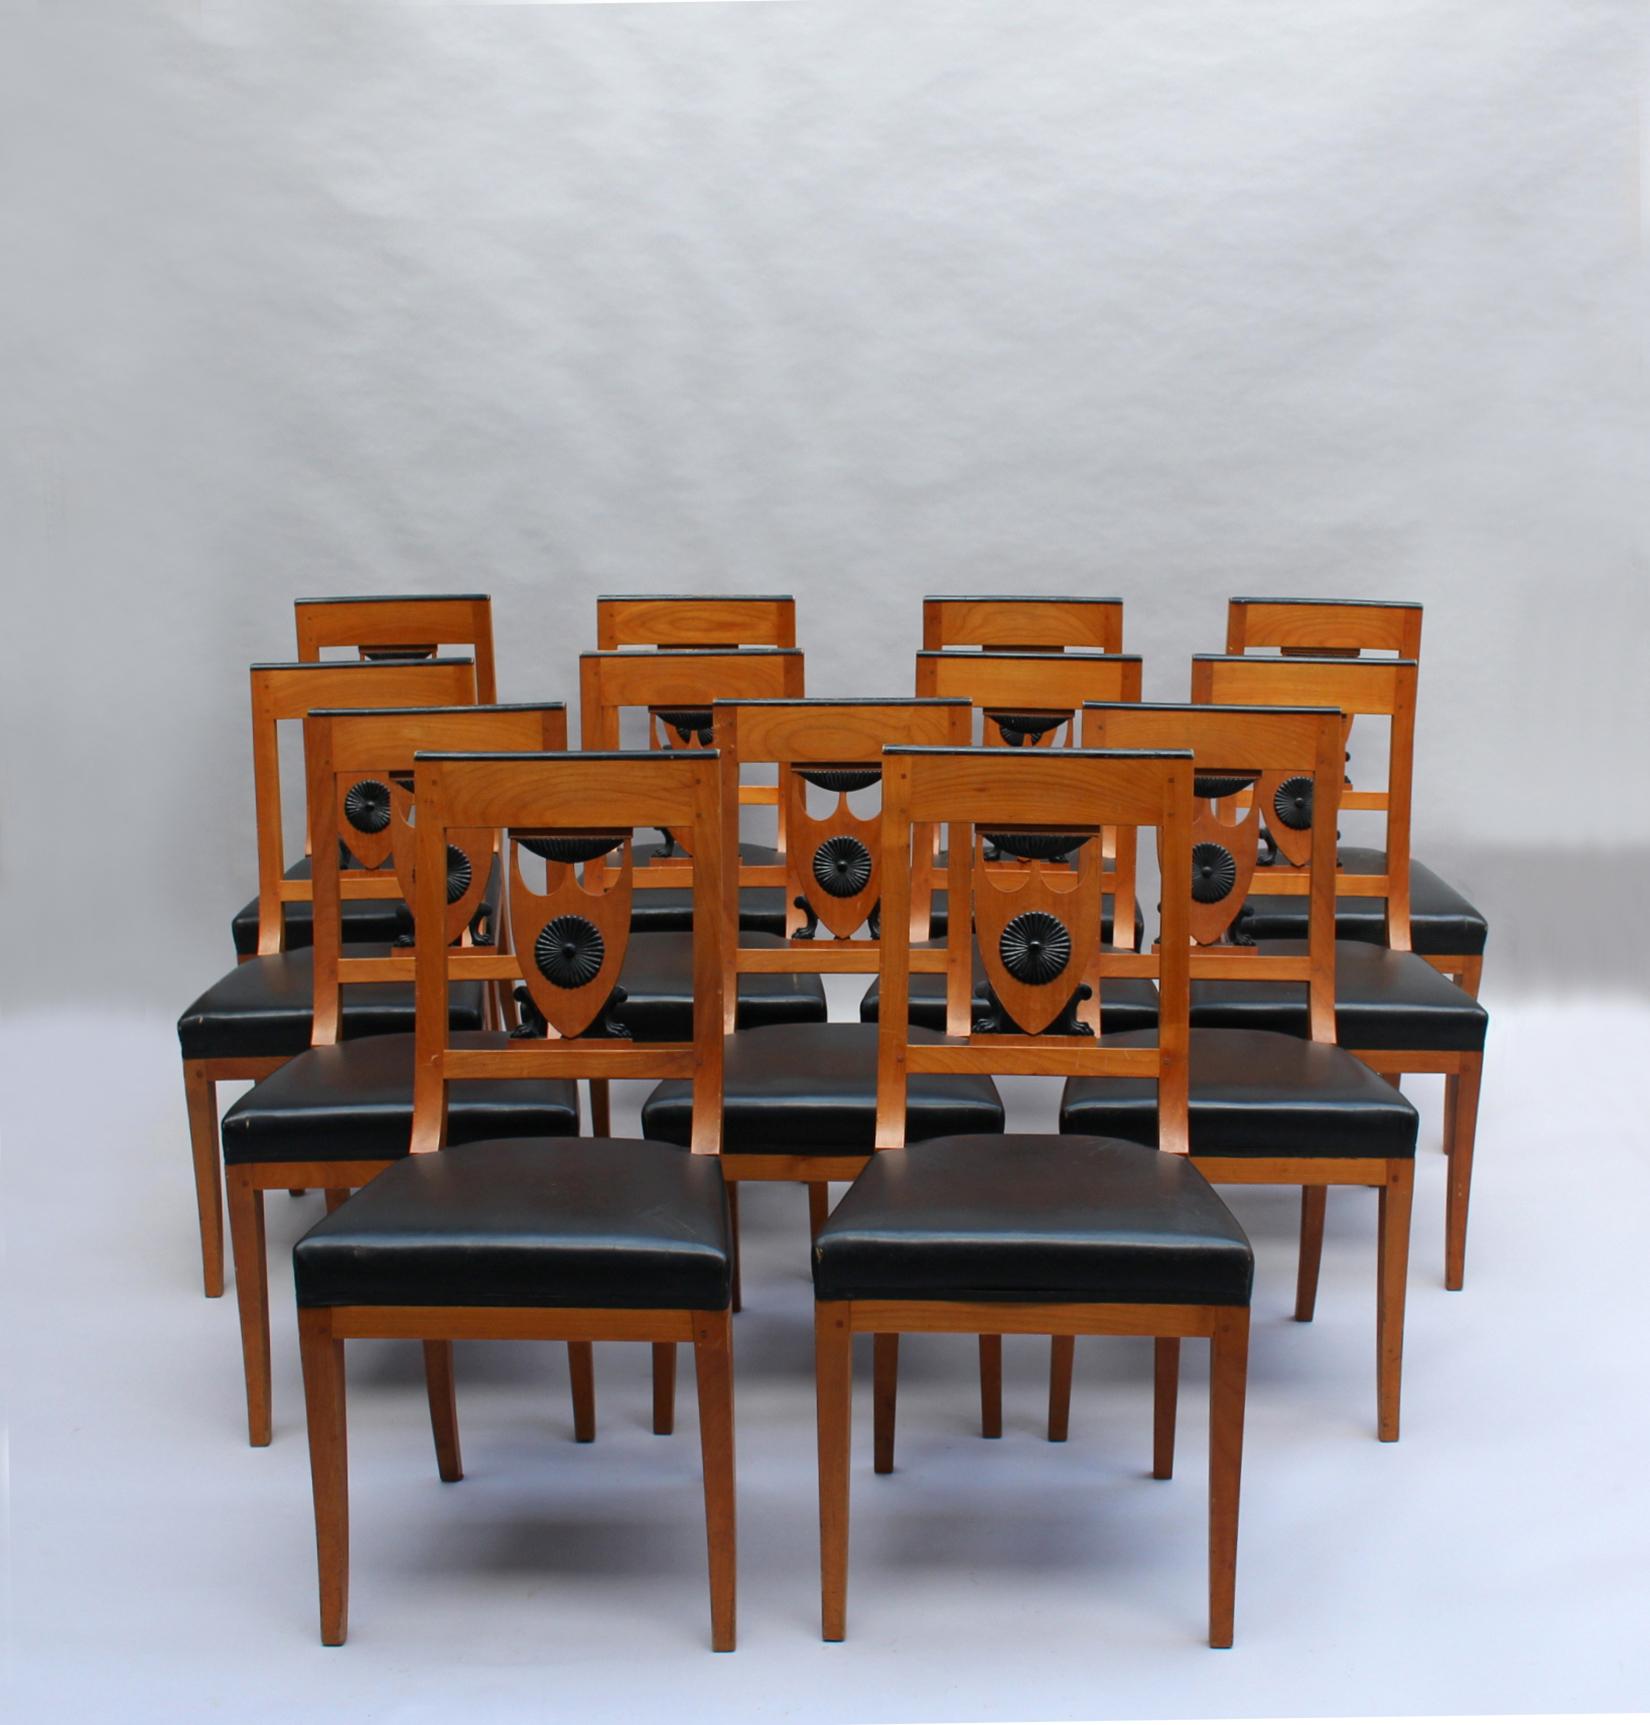 Set of 13 fine French Neoclassical cherry wood dining chairs in an Empire-Directoire style with carved and blackened wood details.